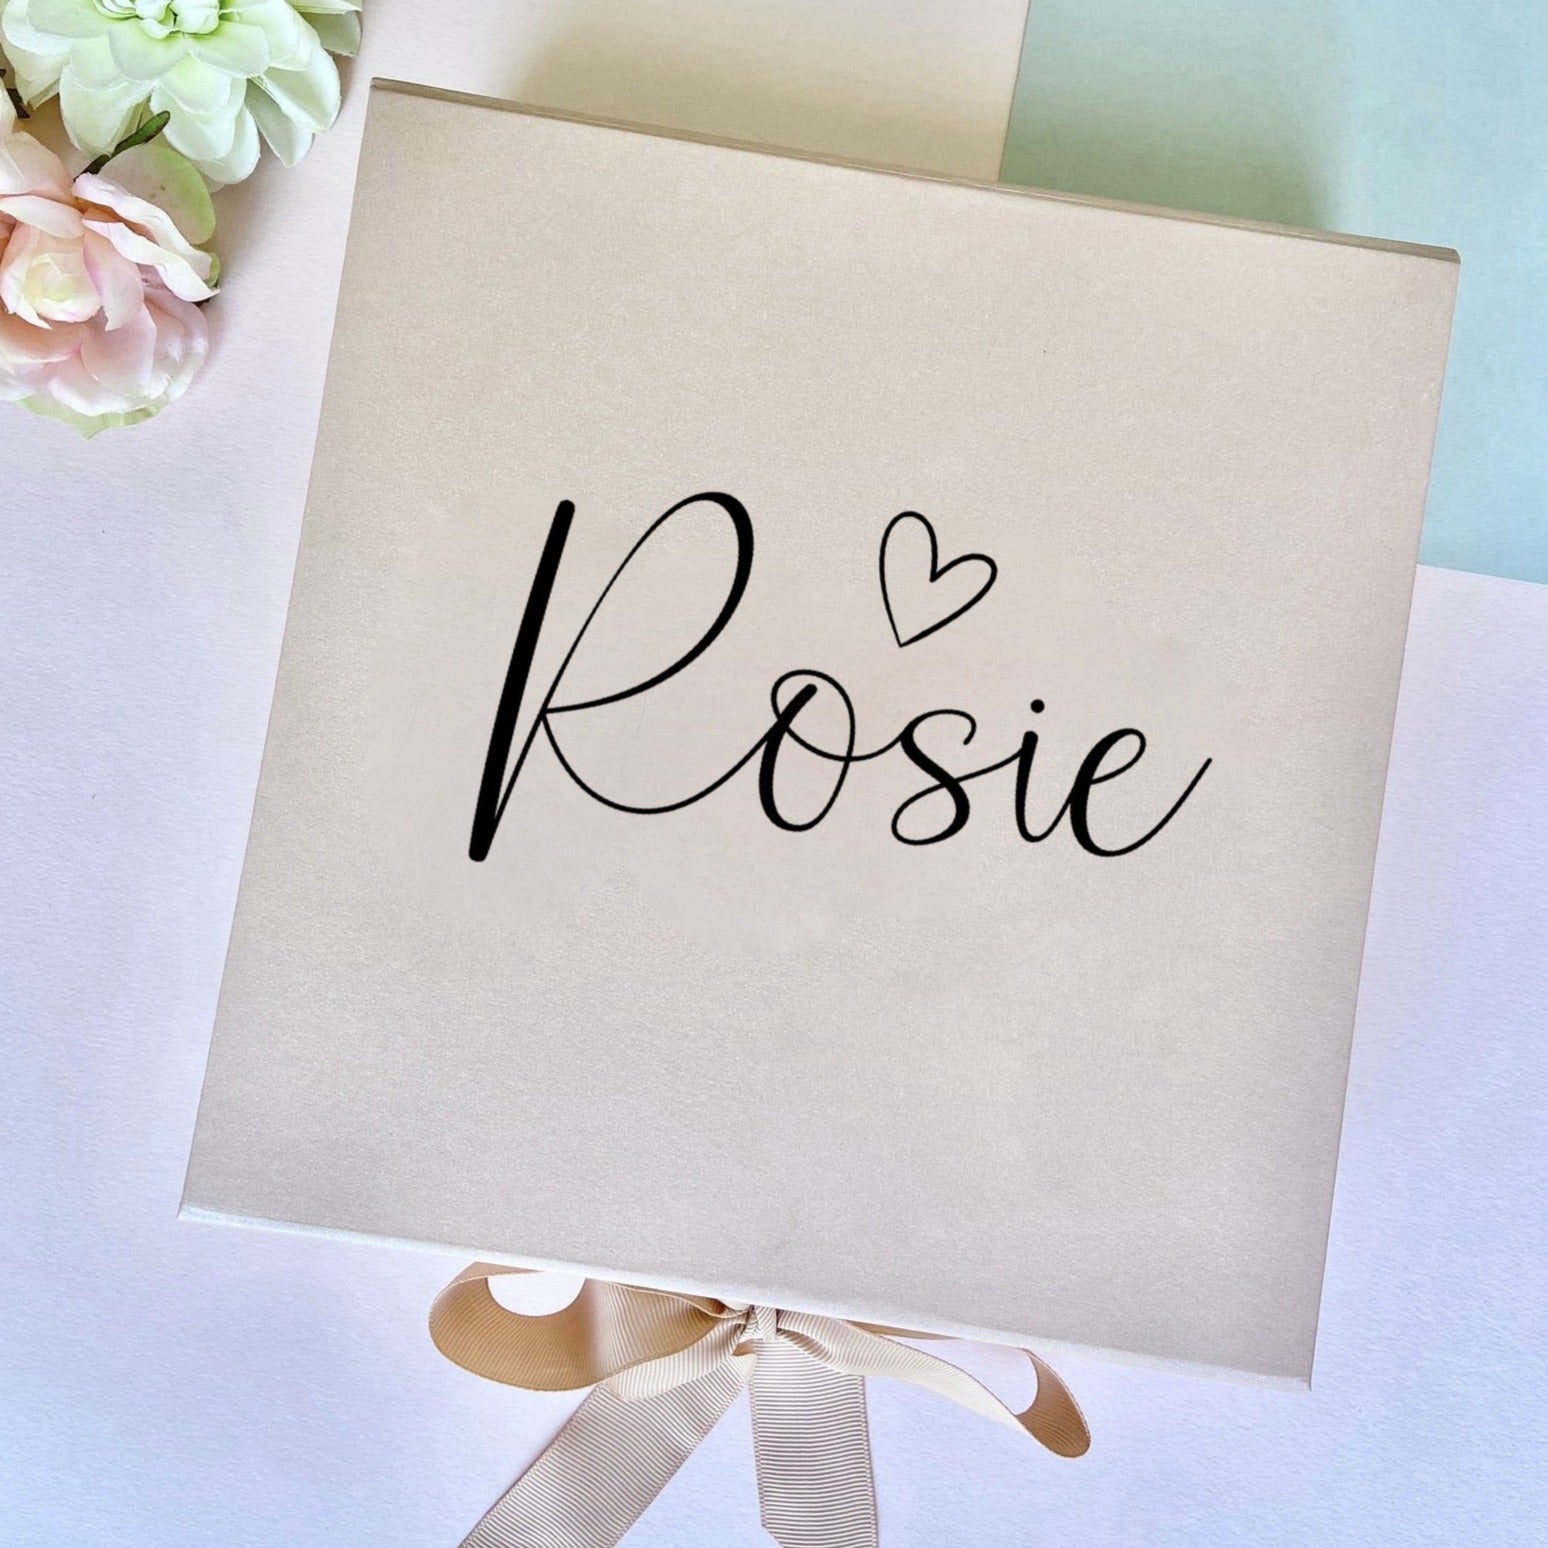 Personalised Gift Box with Heart - Penny Rose Home and Gifts